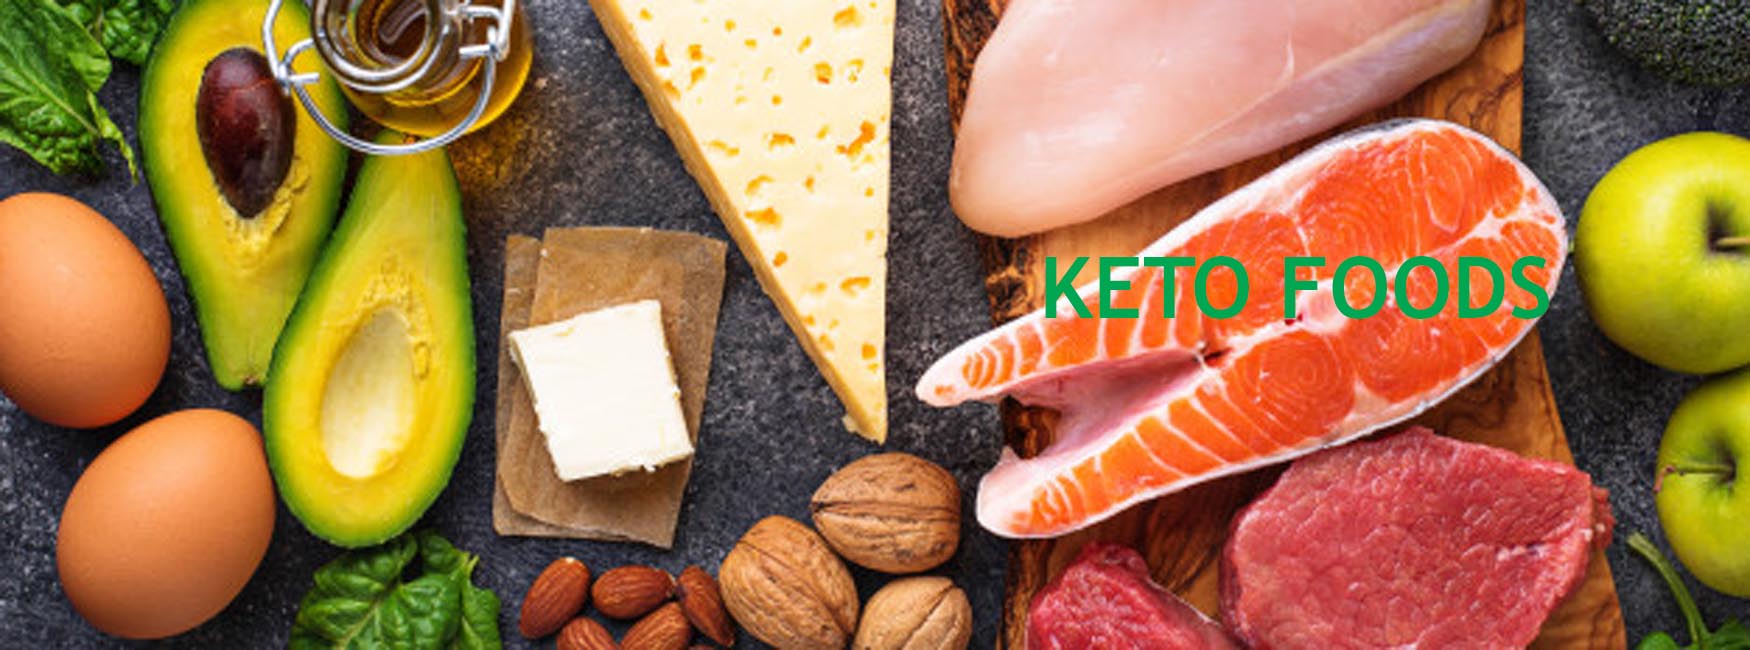 The Keto diet is a popular low carb-high fat diet.